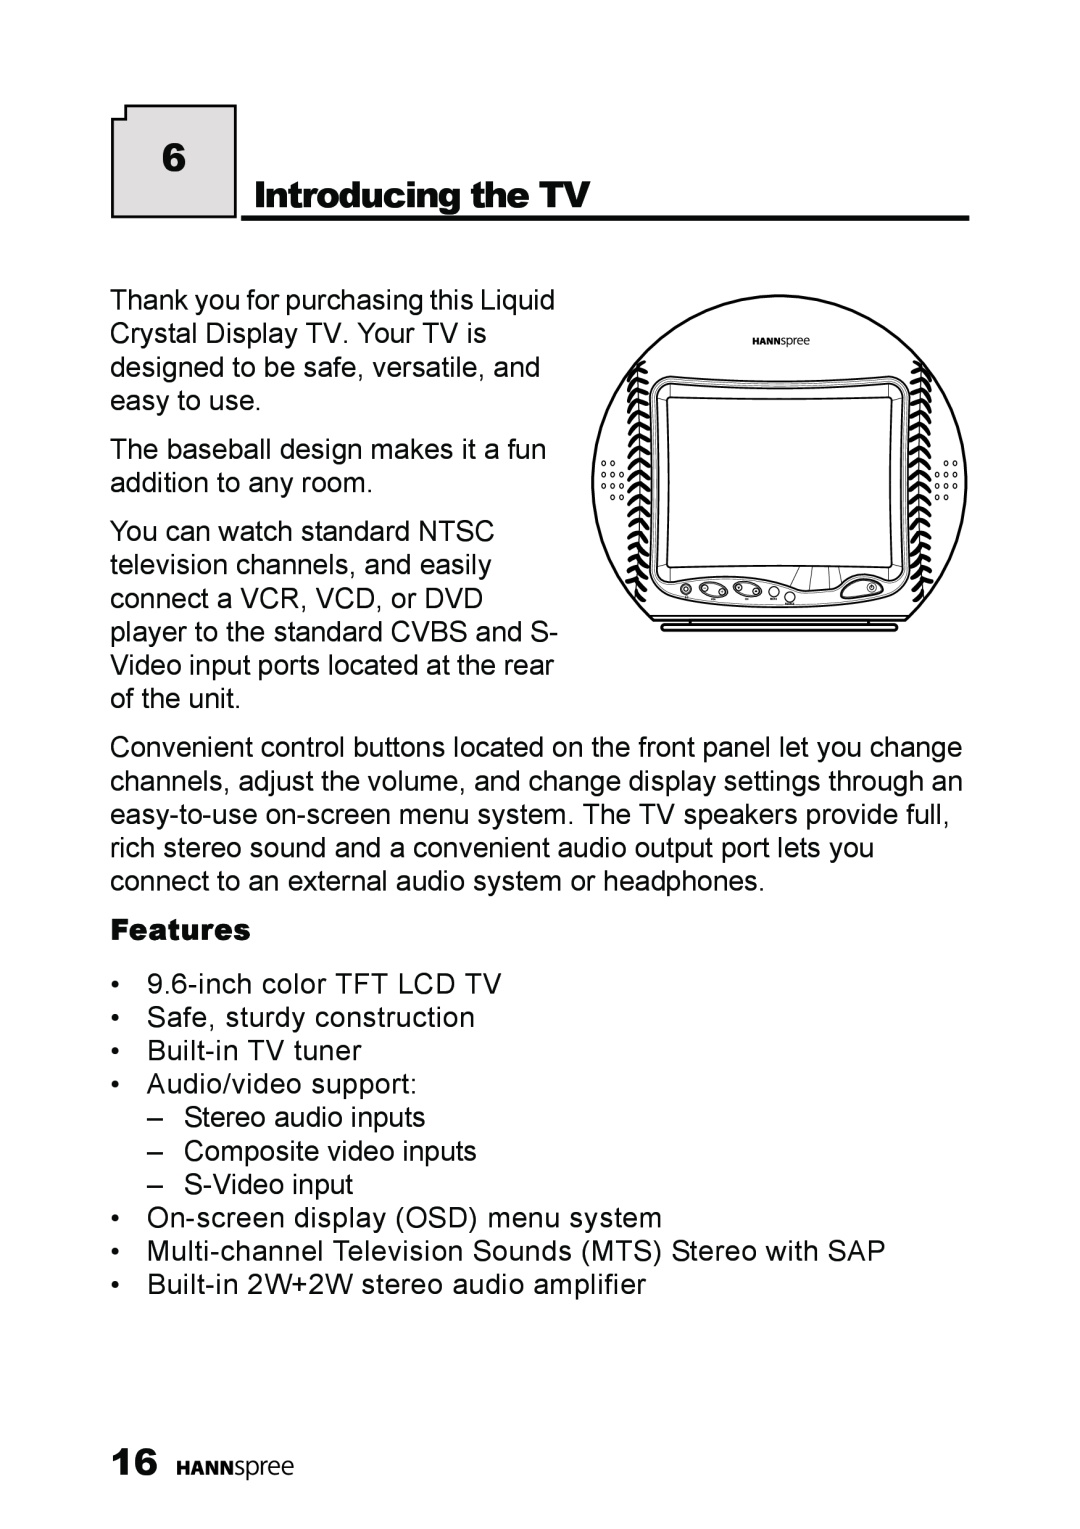 HANNspree ST09-10A1 user manual Introducing the TV, Features 